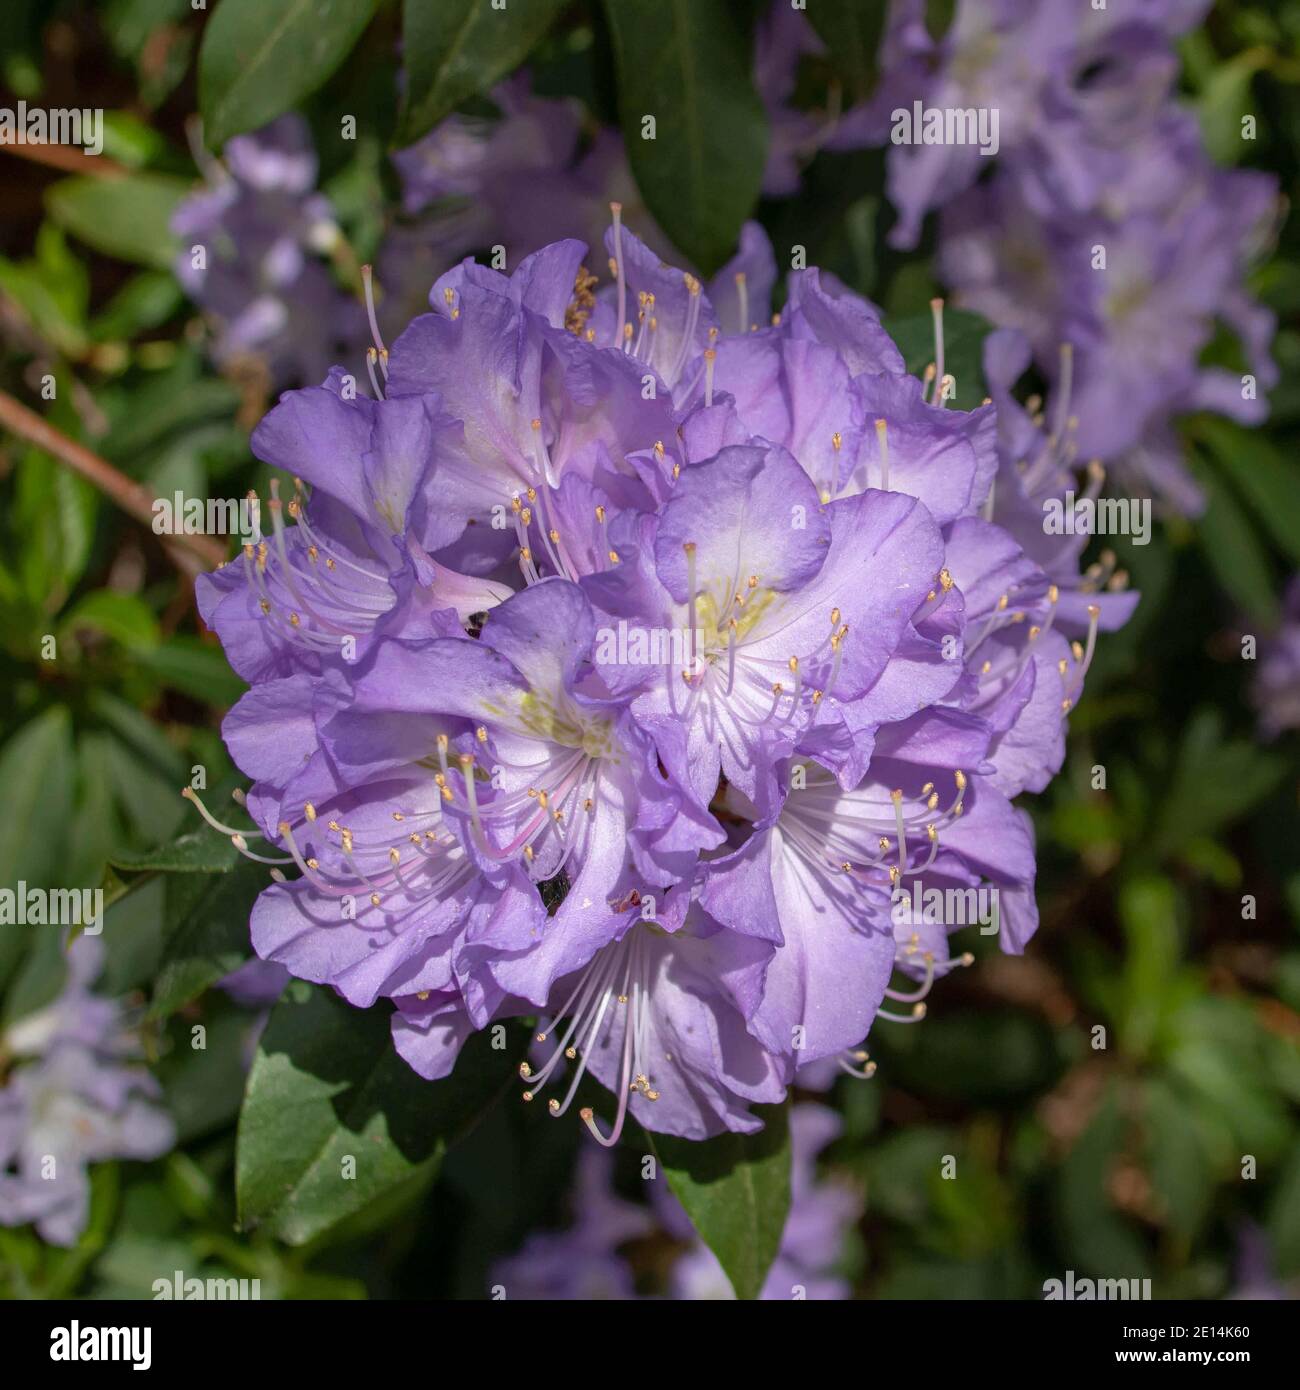 pretty purple flowers of the rhododendron Stock Photo